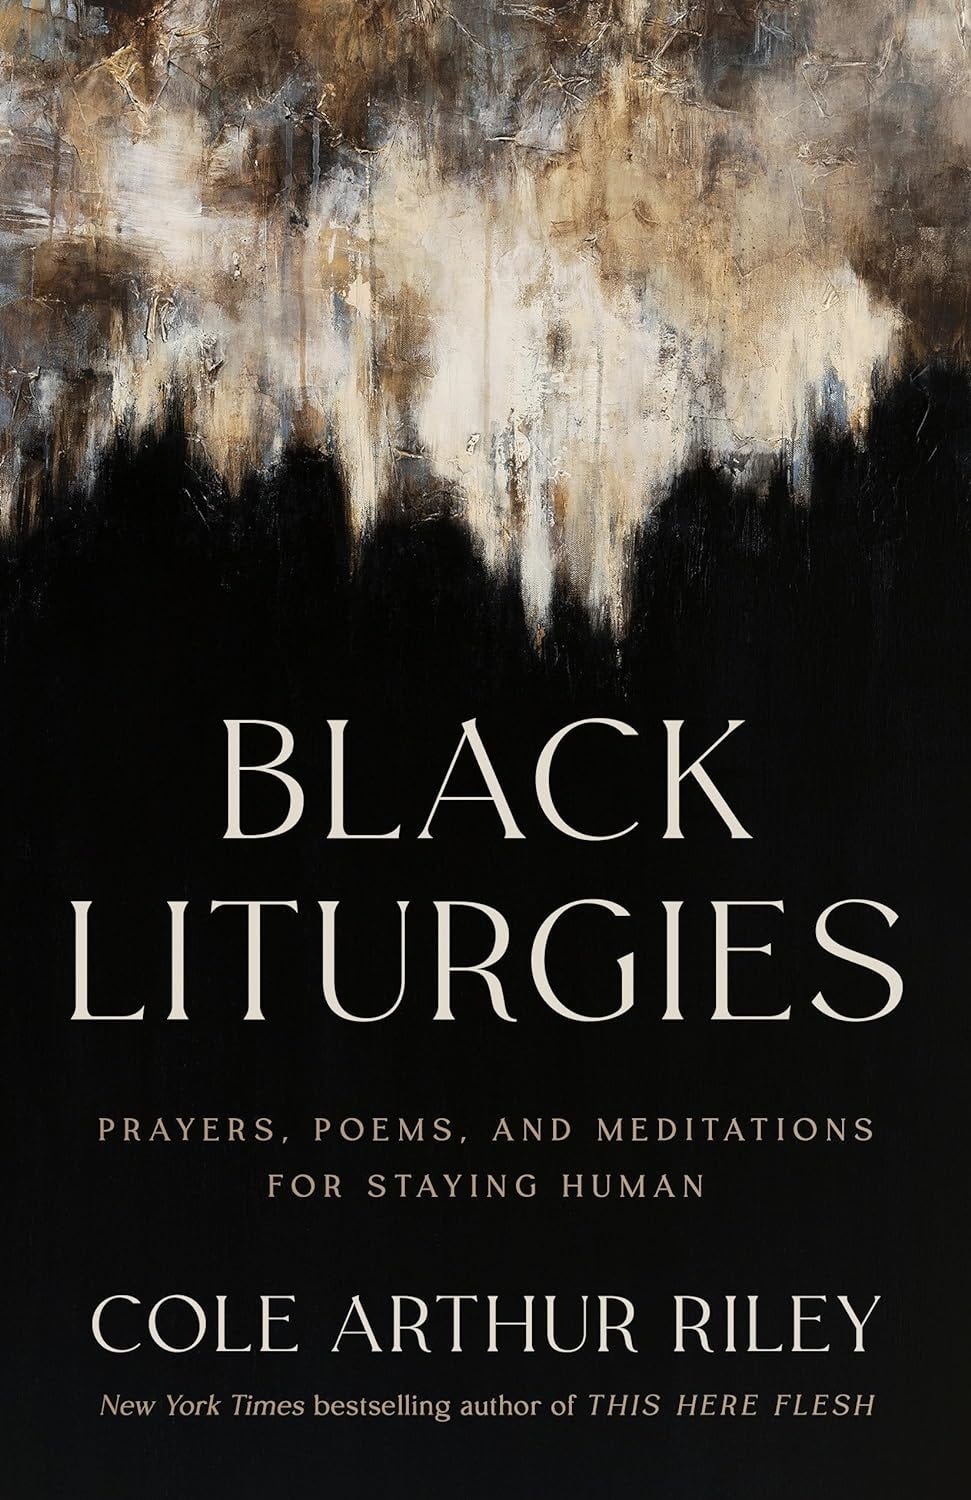 Book cover of Black Liturgies: Prayers, Poems, and Meditations for Staying Human by Cole Arthur Riley